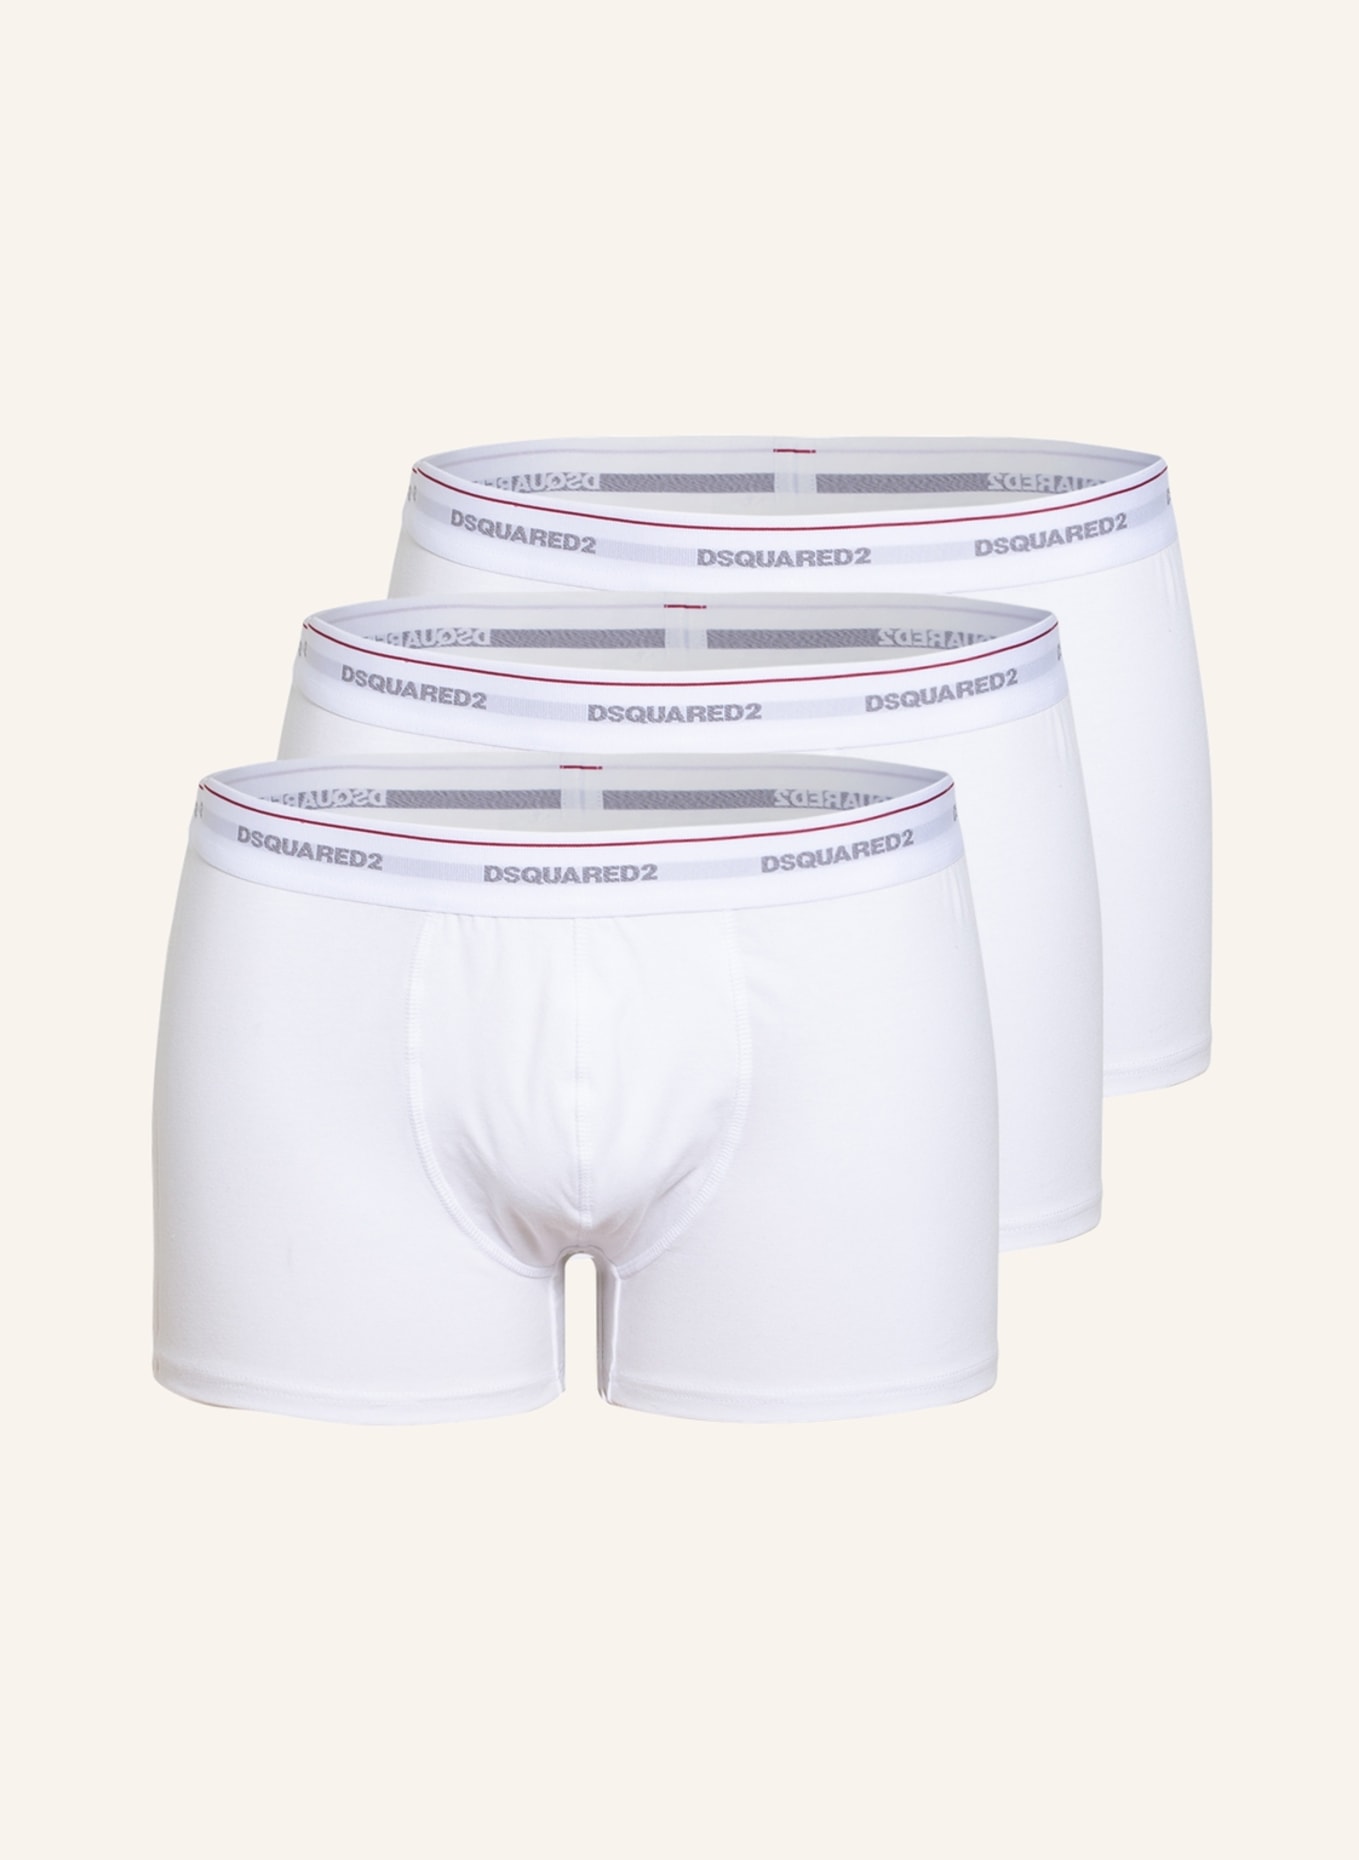 DSQUARED2 3er-Pack Boxershorts , Farbe: WEISS (Bild 1)